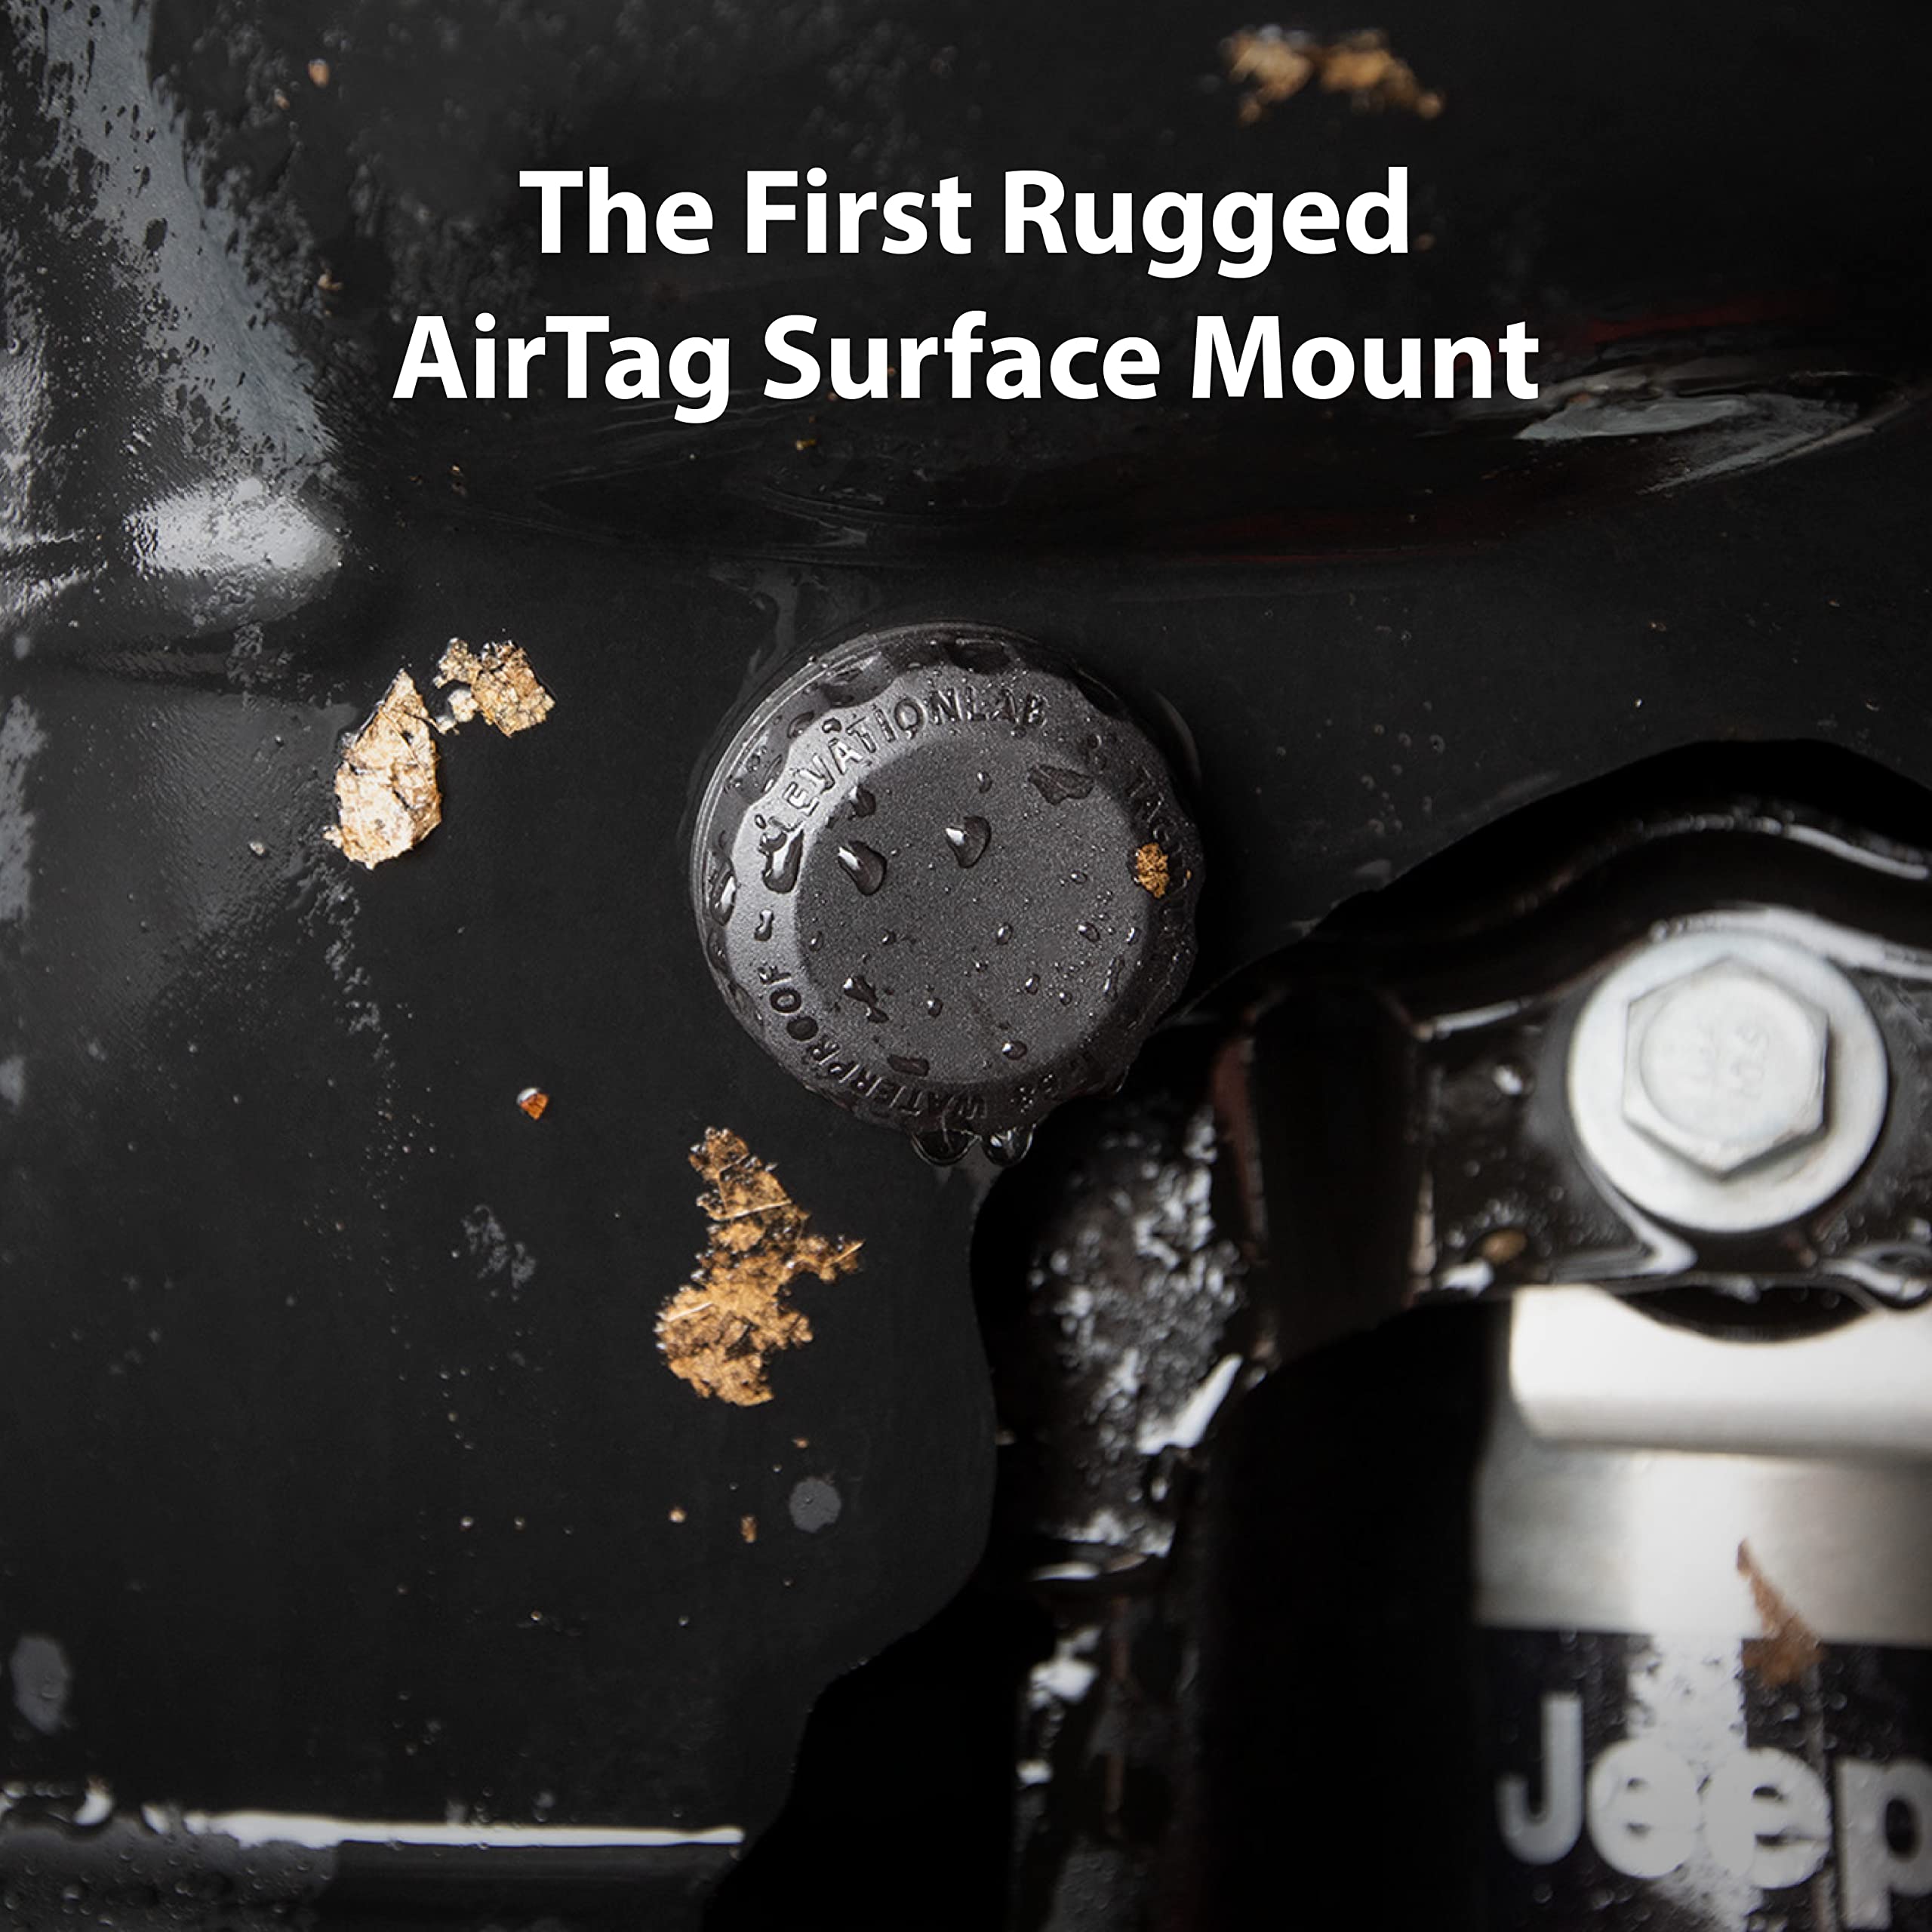 TagVault AirTag Surface Adhesive Mount - The Original Waterproof AirTag Stick-On Holder | 3M VHB, Ultra-Durable, Screw-On Design, Find Your Bike, Car, Skis, & More | Elevation Lab